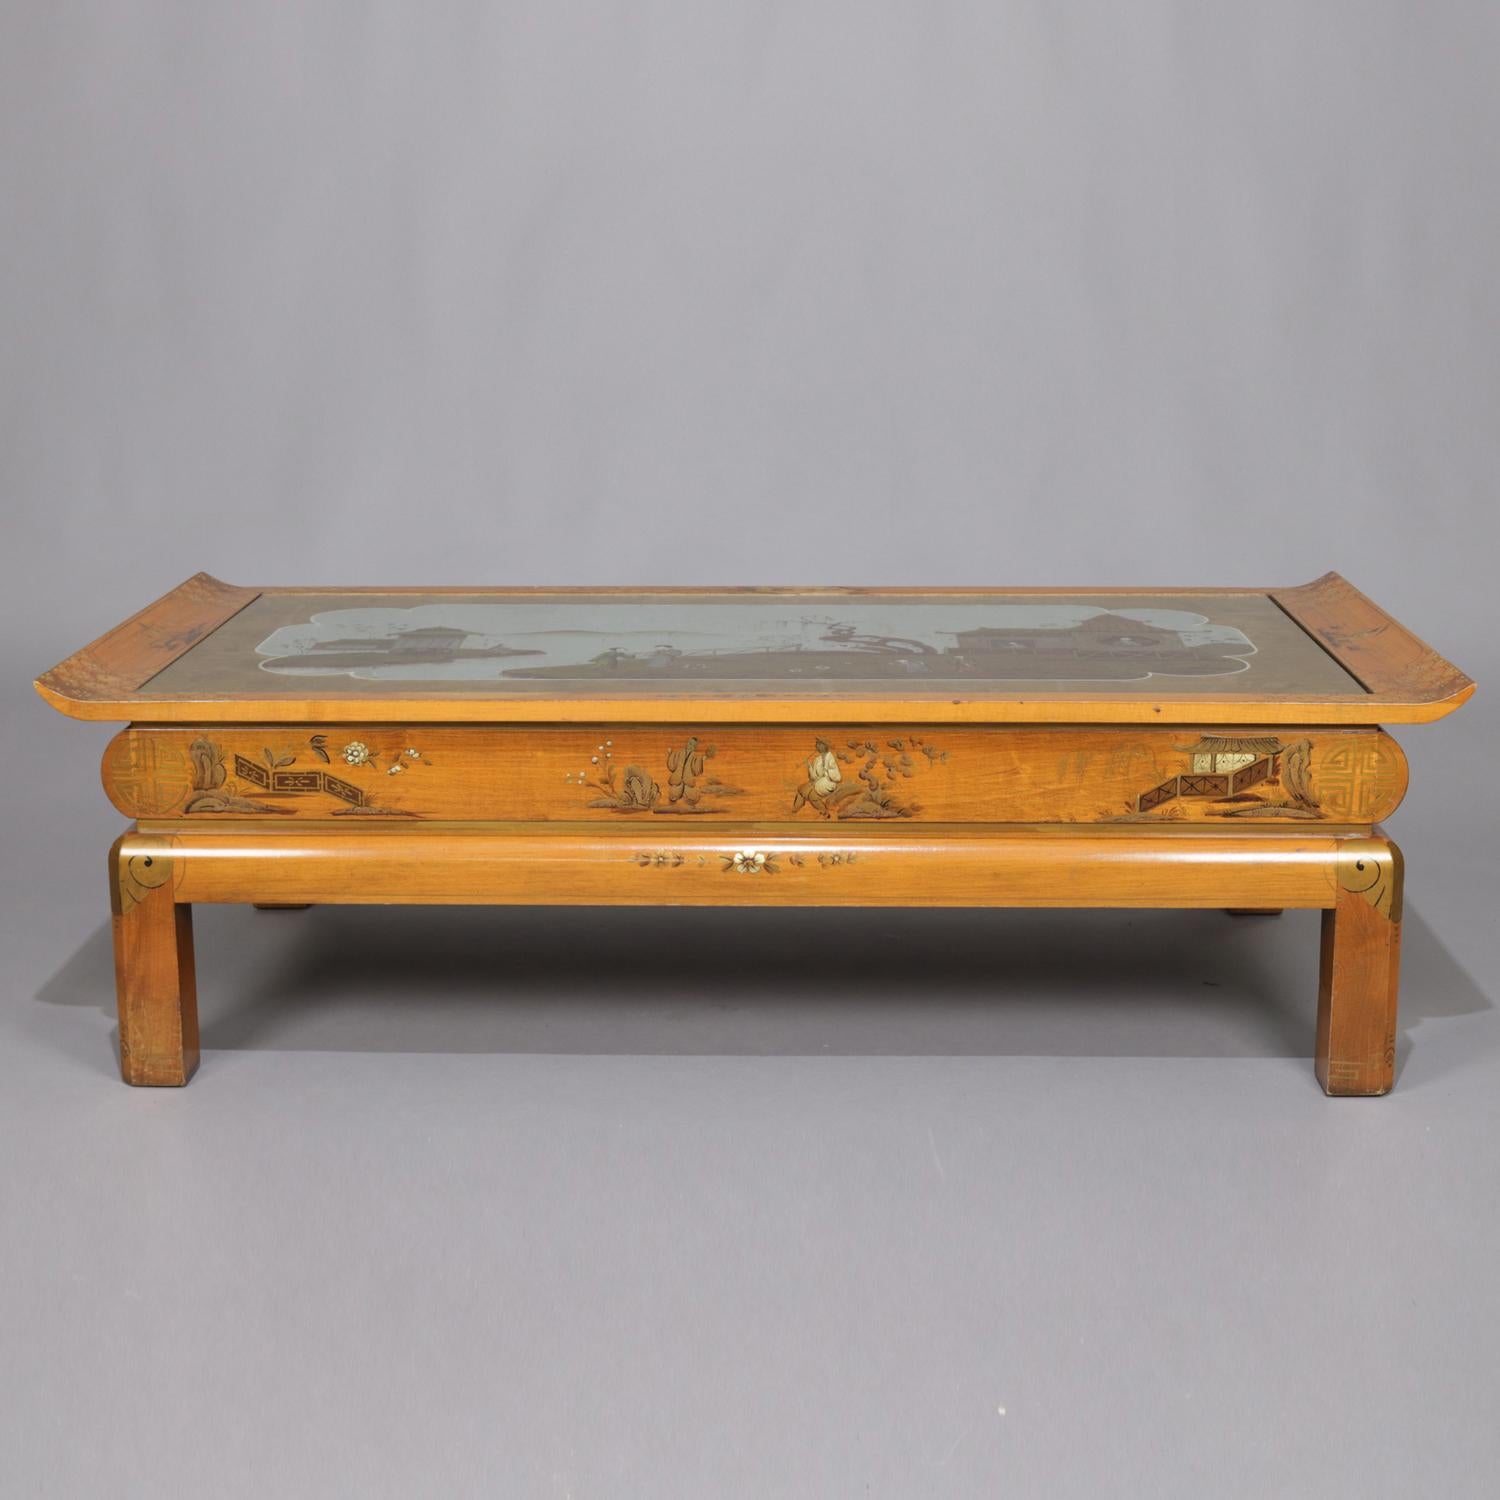 Oversized Hand-Painted and Gilt Pictorial Chinoiserie Coffee Table, circa 1940 In Good Condition For Sale In Big Flats, NY